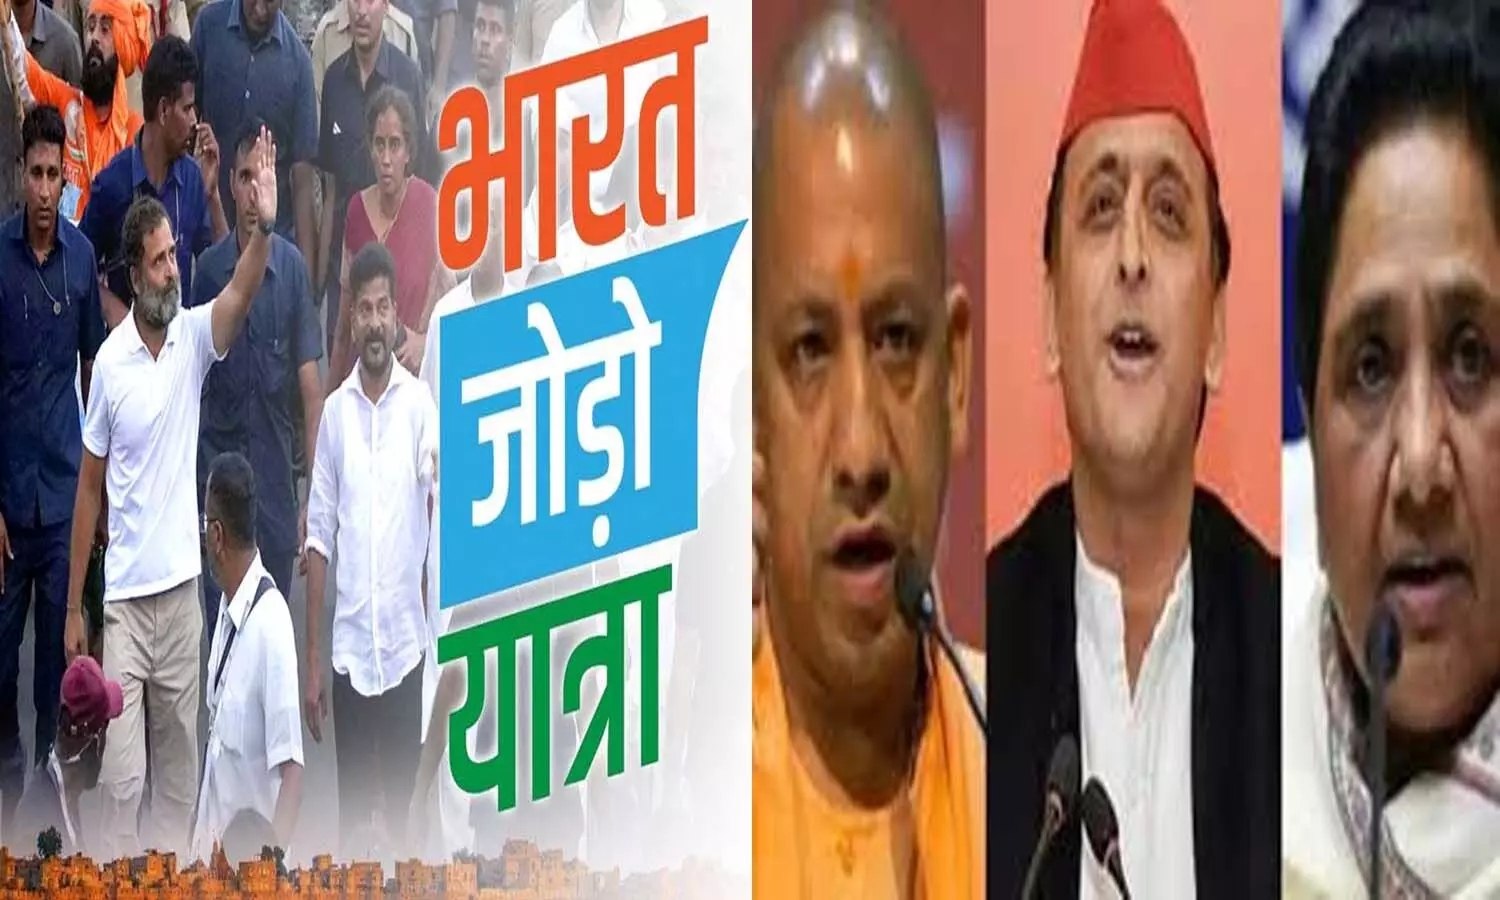 The picture will be clear in the concluding program of the Bharat Jodo Yatra regarding the politics of Uttar Pradesh